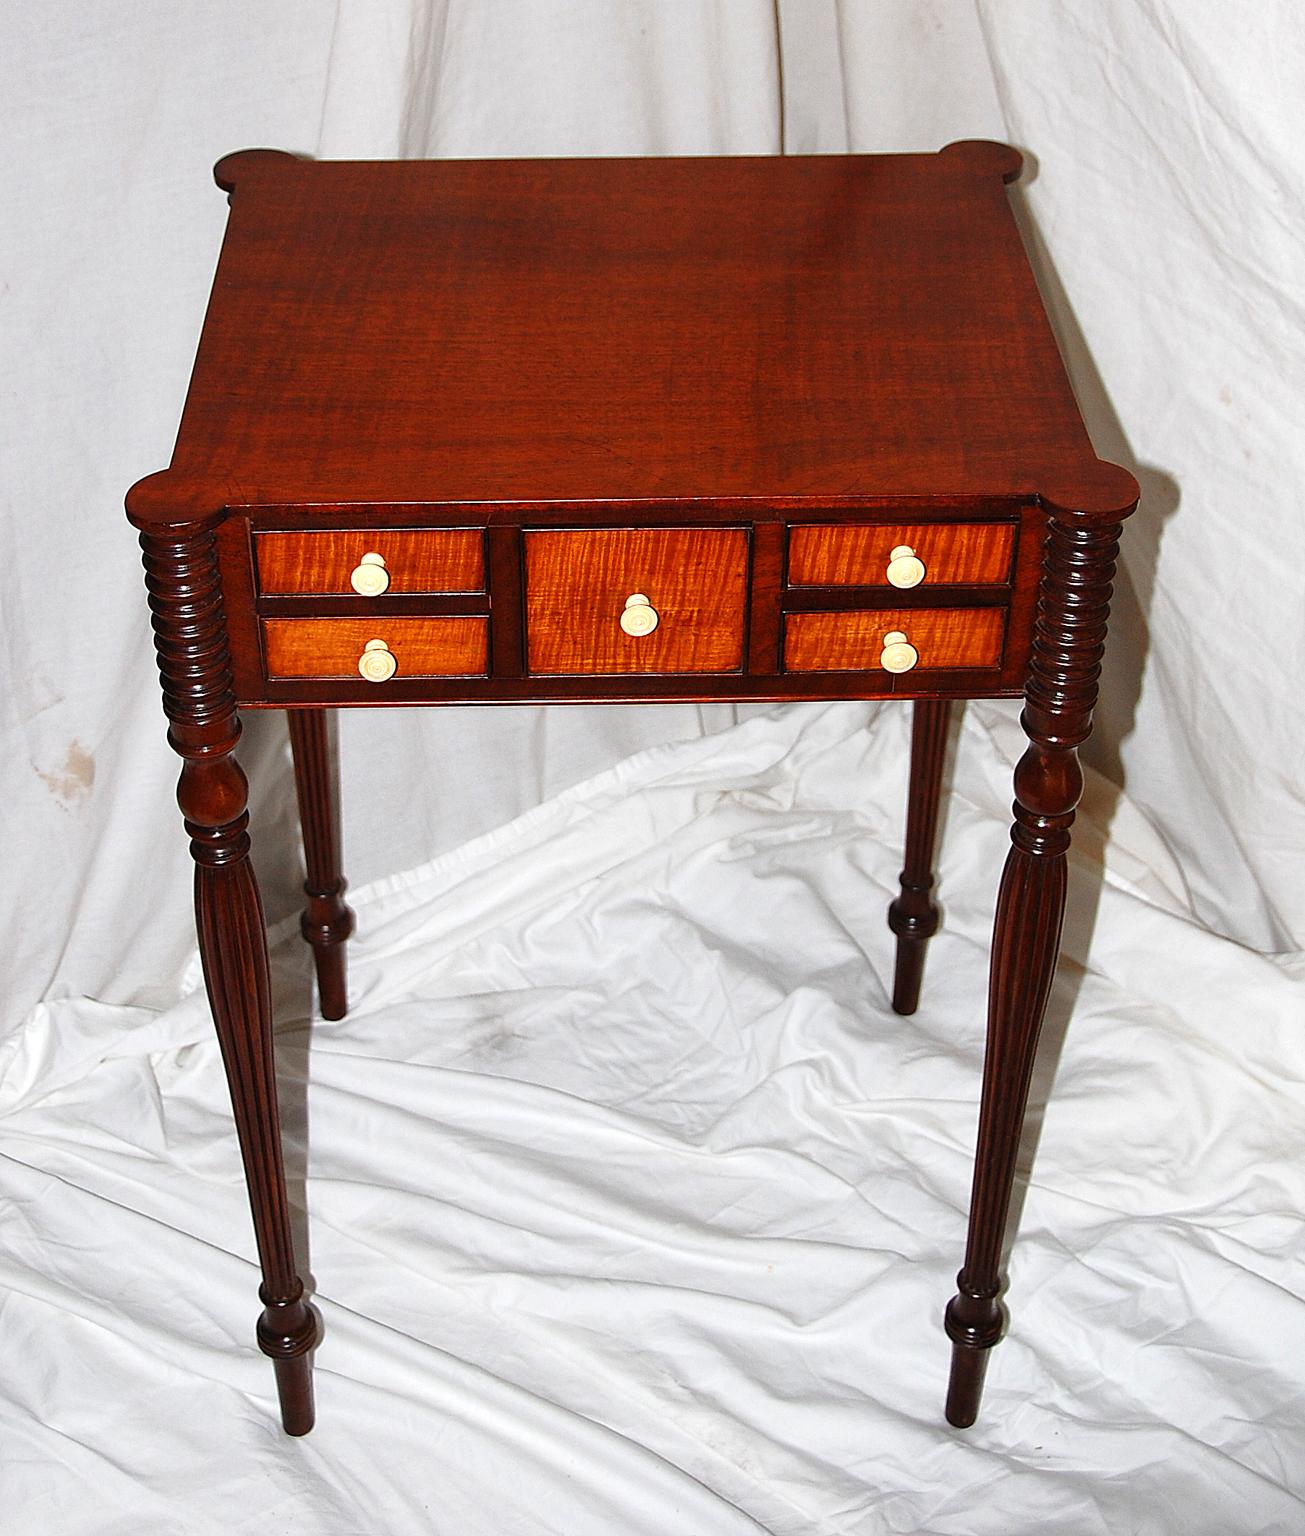 American pair of Boston Sheraton worktables in mahogany and bird’s-eye maple. The delicate reeded, turned and tapered legs culminate in ring carved turret tops which form cookie corners to the top of each table. The five small drawers on each table